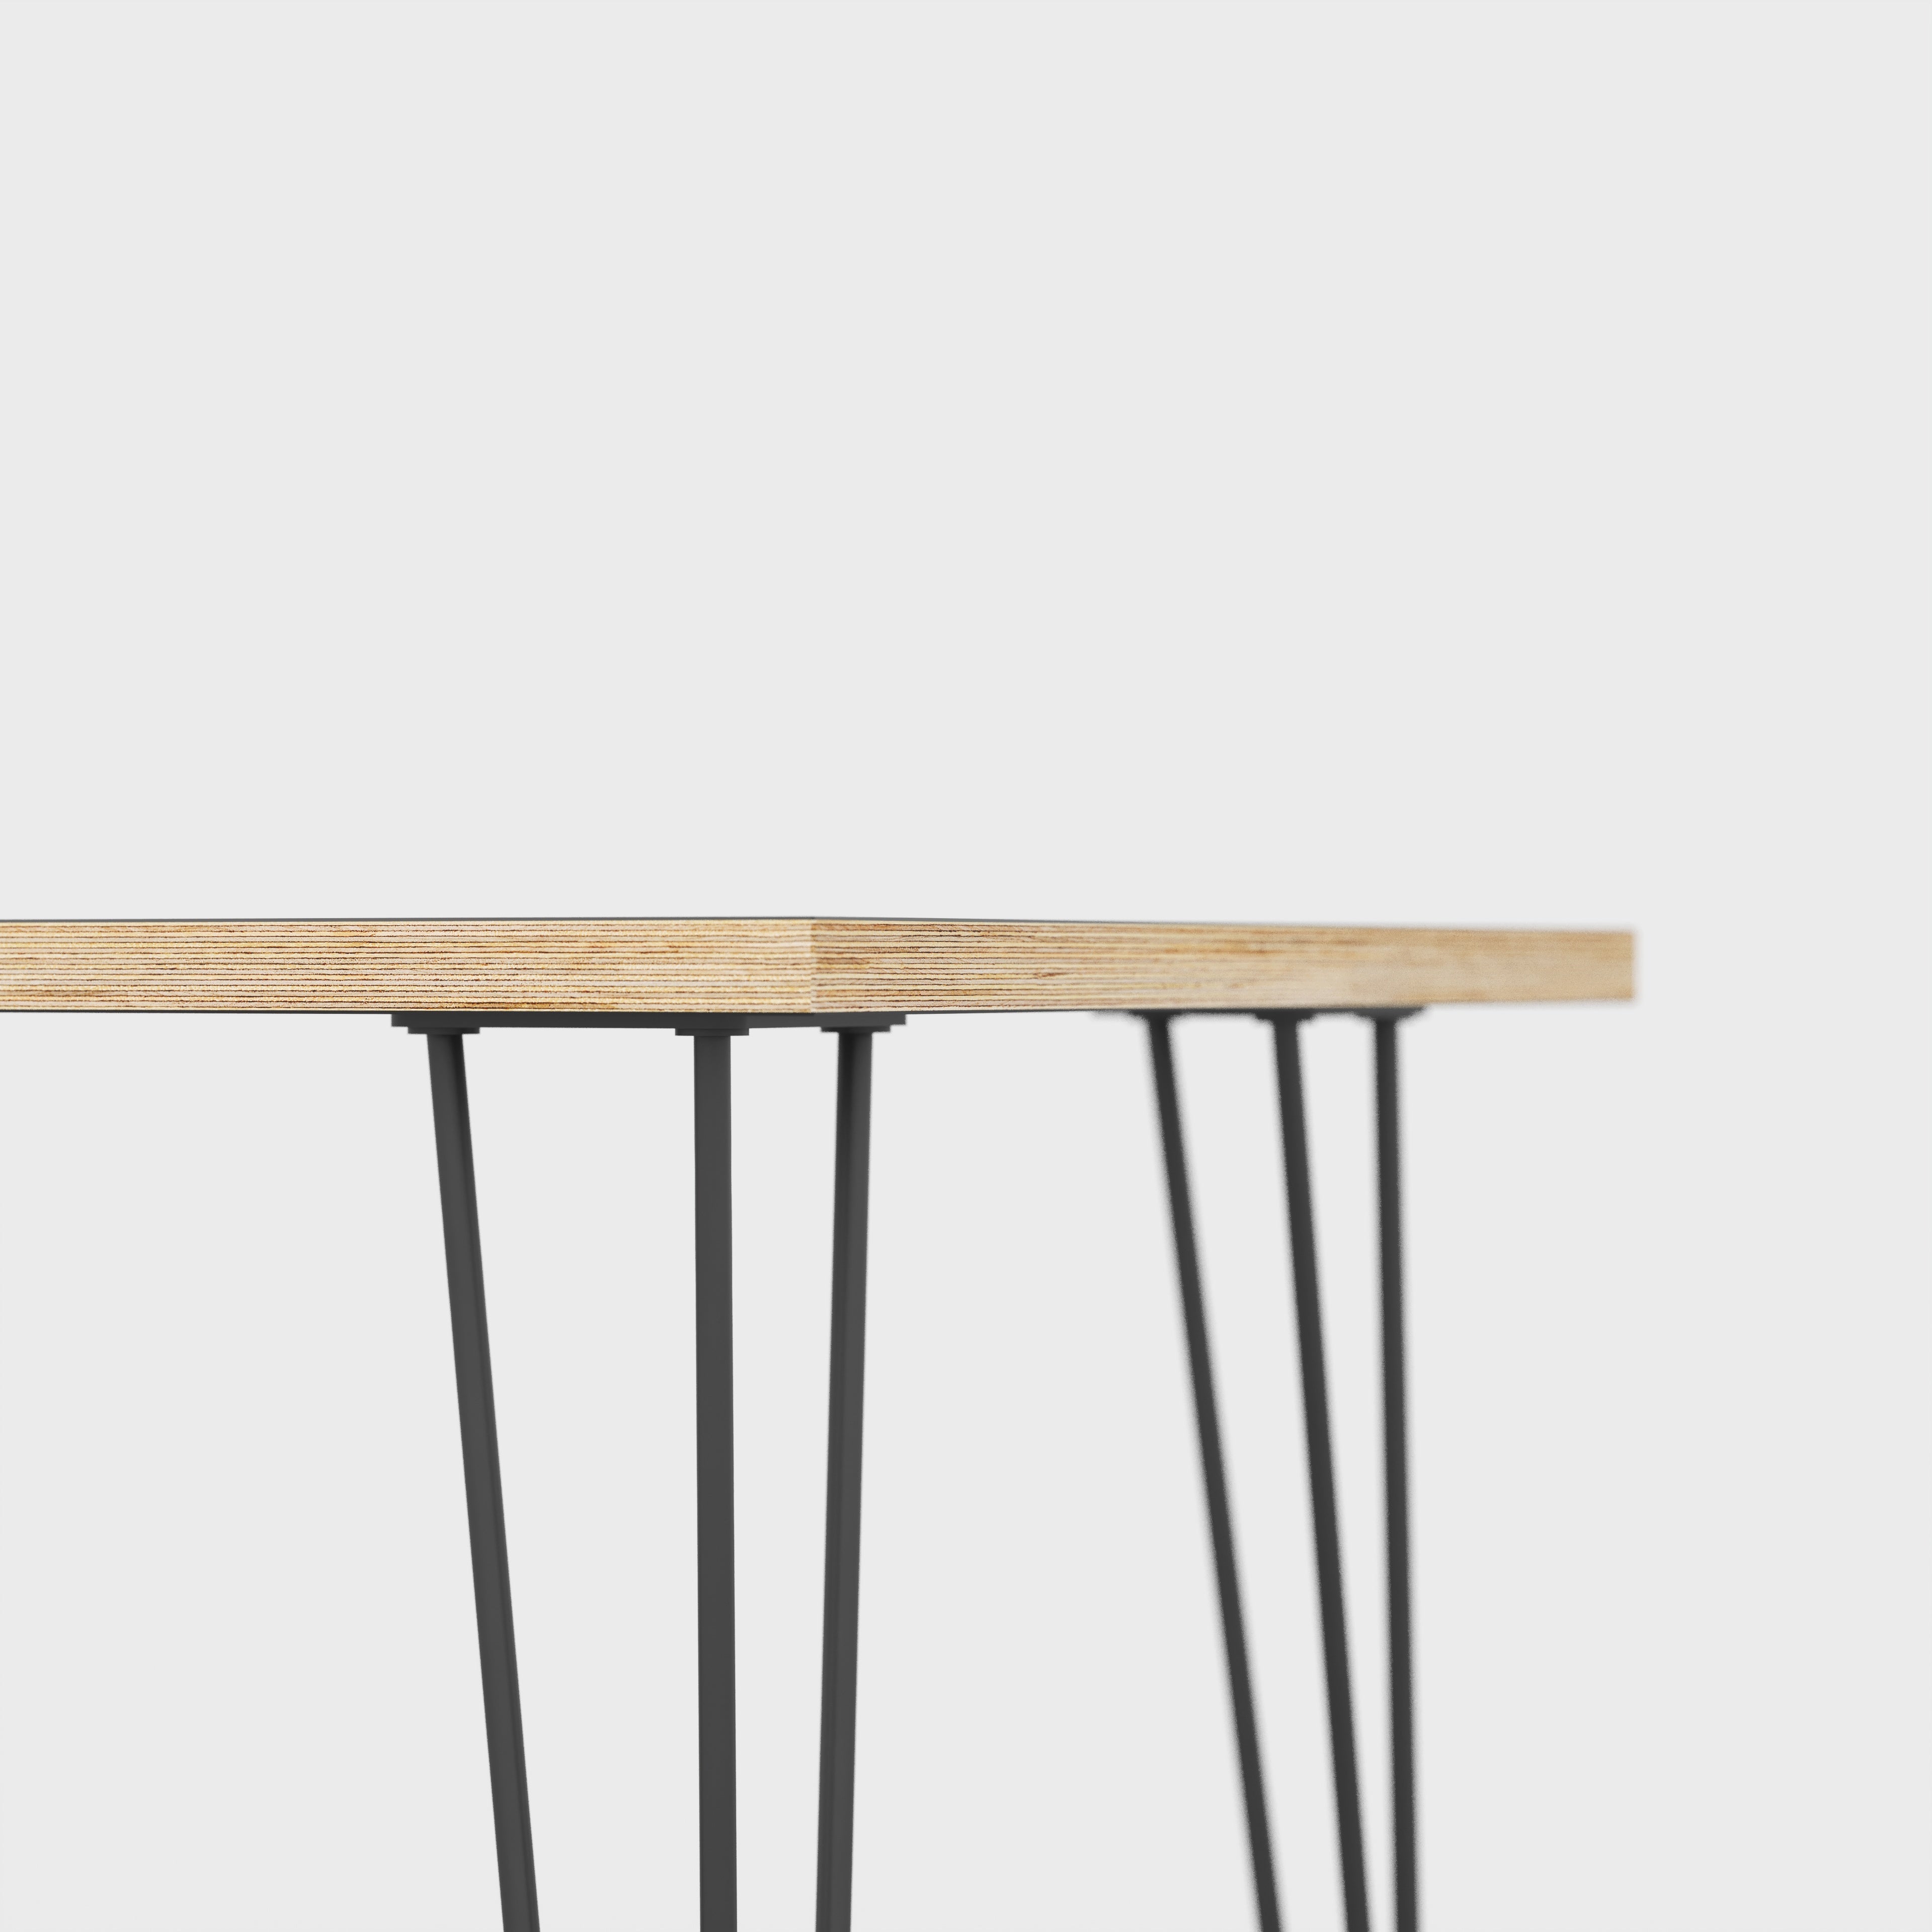 Side Table with Black Hairpin Legs - Plywood Birch - 500(w) x 500(d) x 425(h)